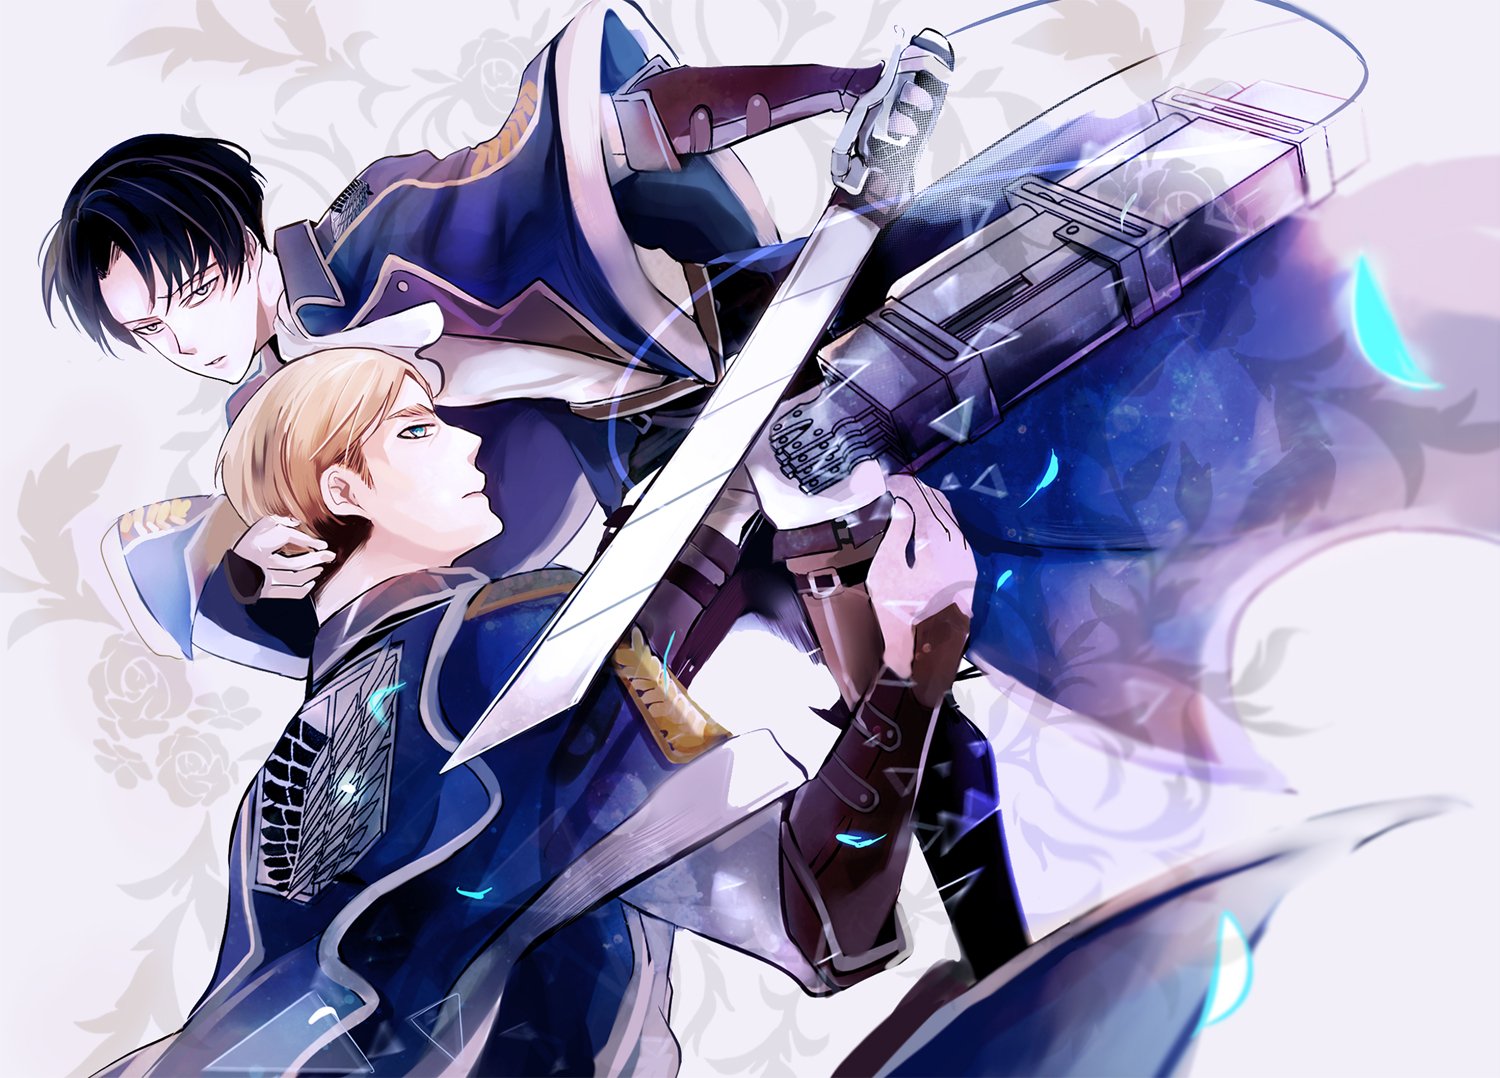 Free Download Shingeki No Kyojin Erwin Smith And Levi Ackerman Wallpaper And 1500x1078 For Your Desktop Mobile Tablet Explore 23 Attack On Titan Levi Ackerman Wallpapers Attack On Titan